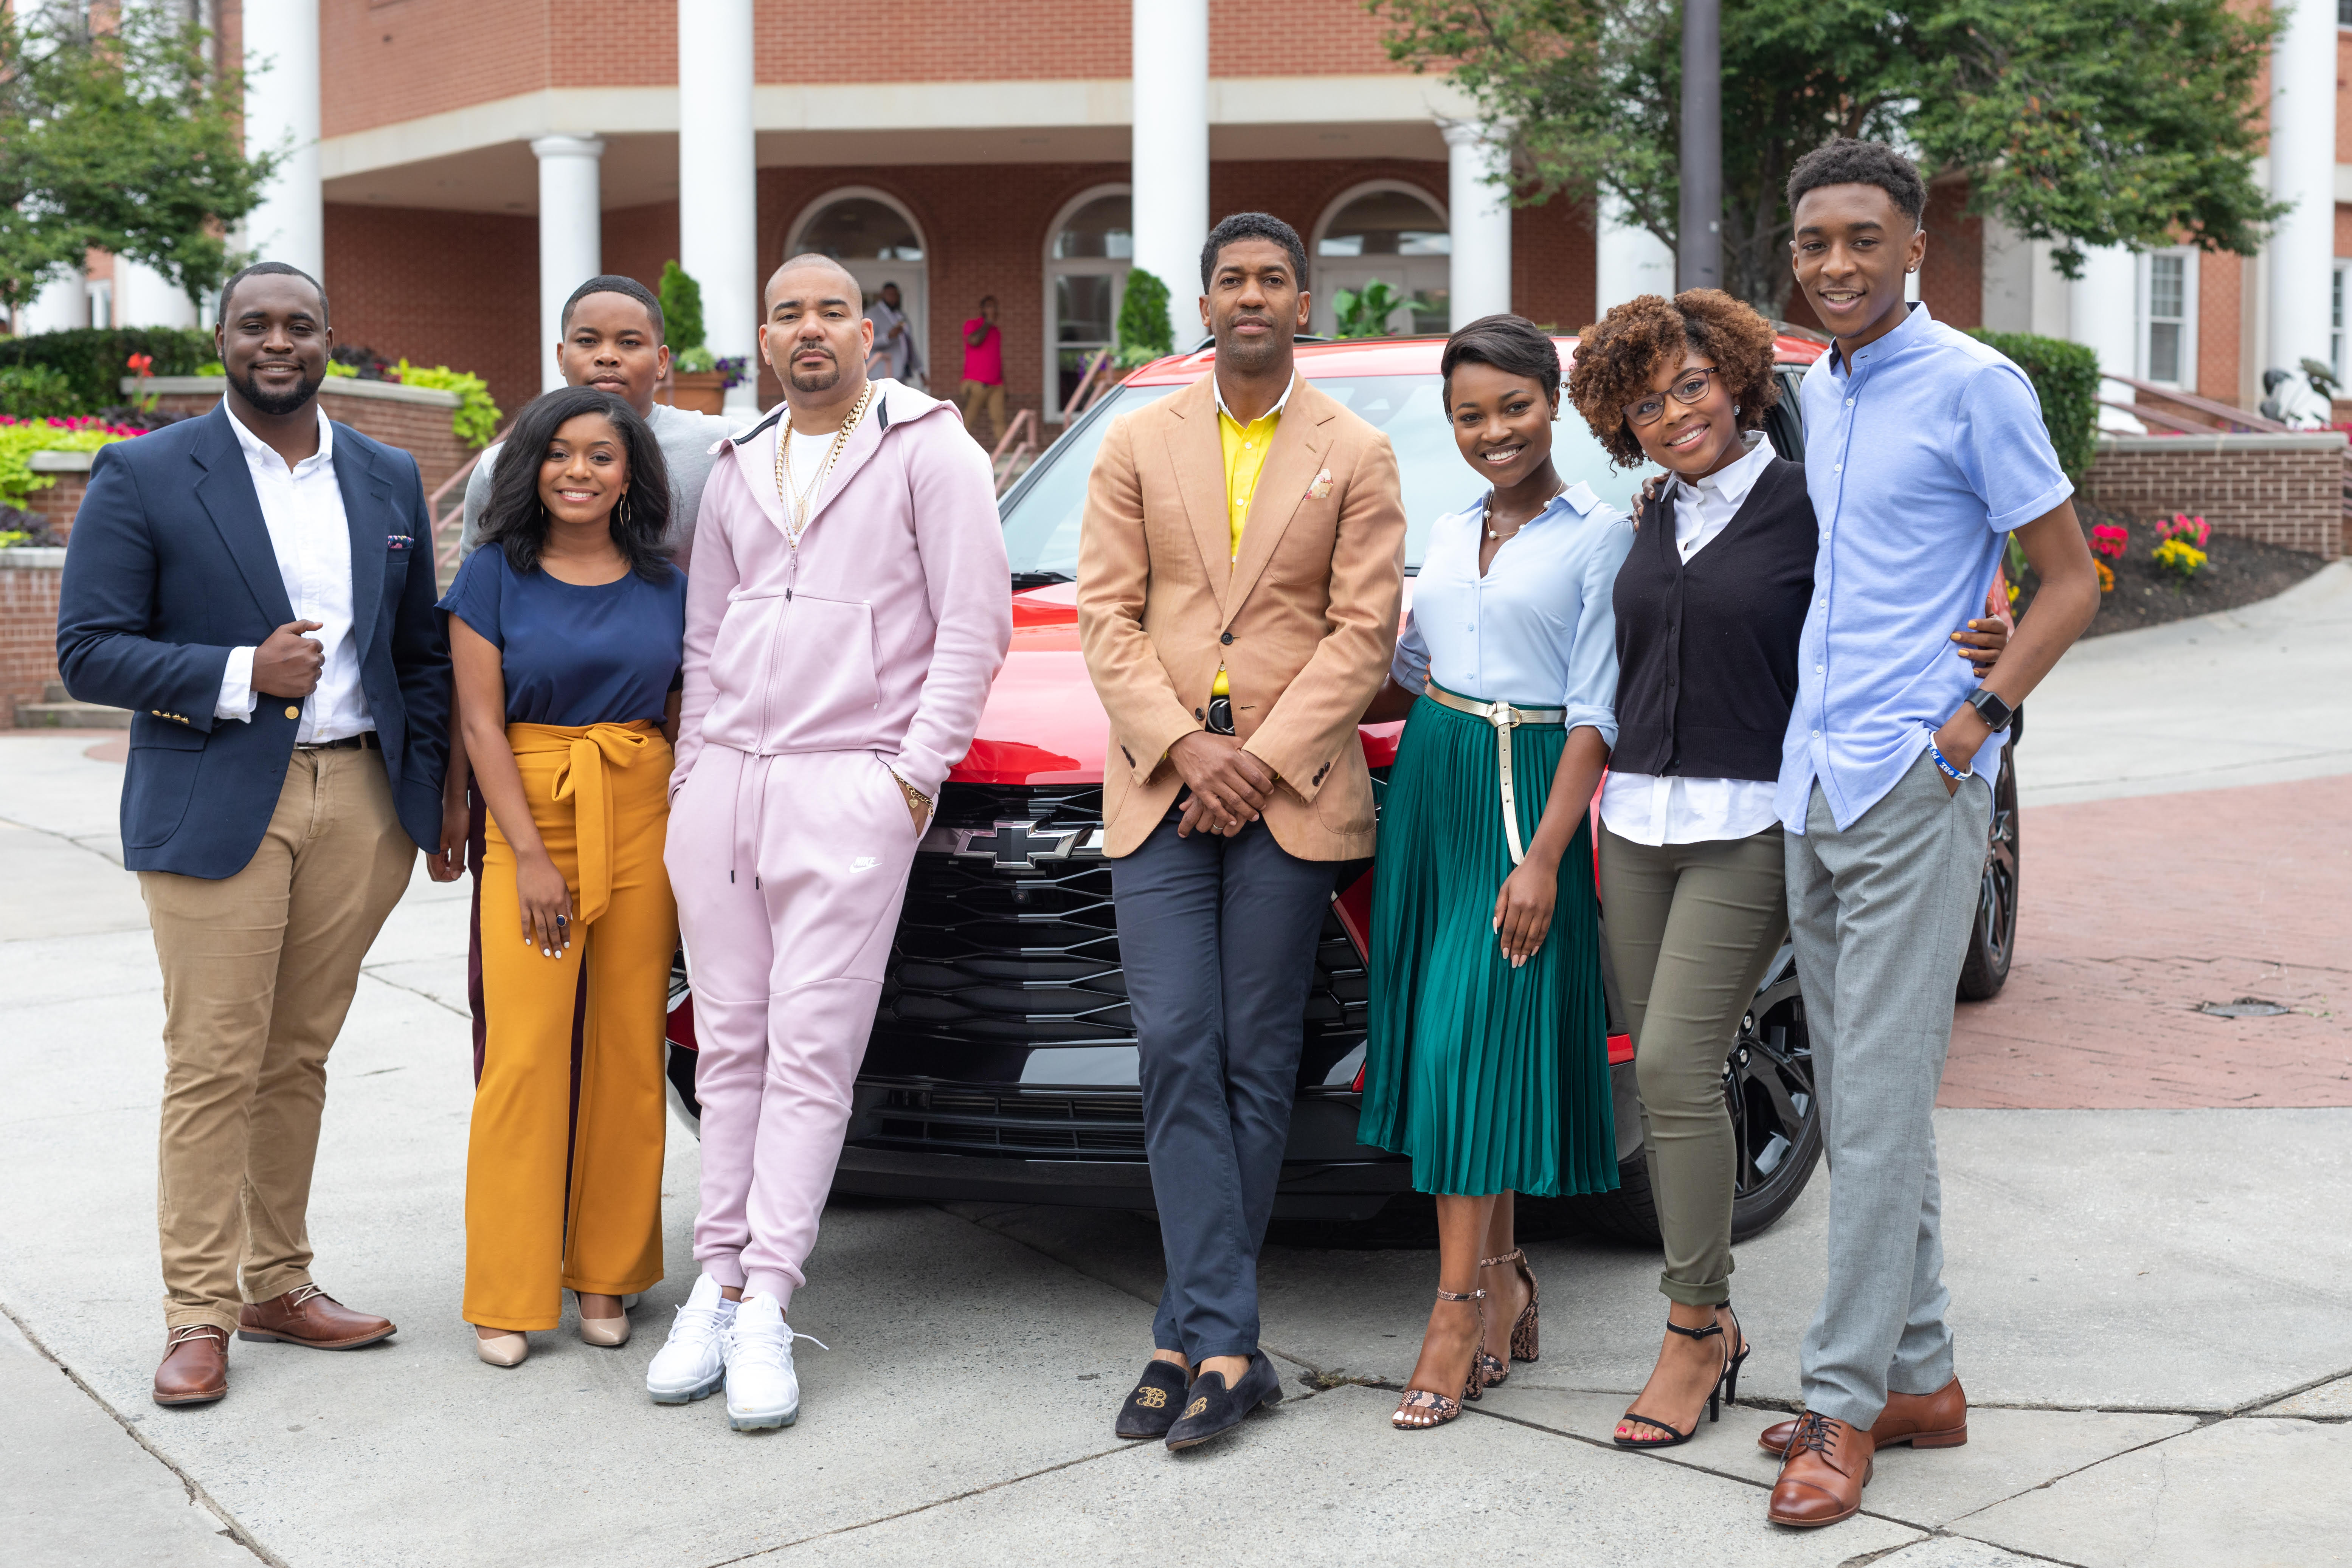 Chevrolet Announces 4th Annual Discover The Unexpected Fellowship For 6 HBCU Students